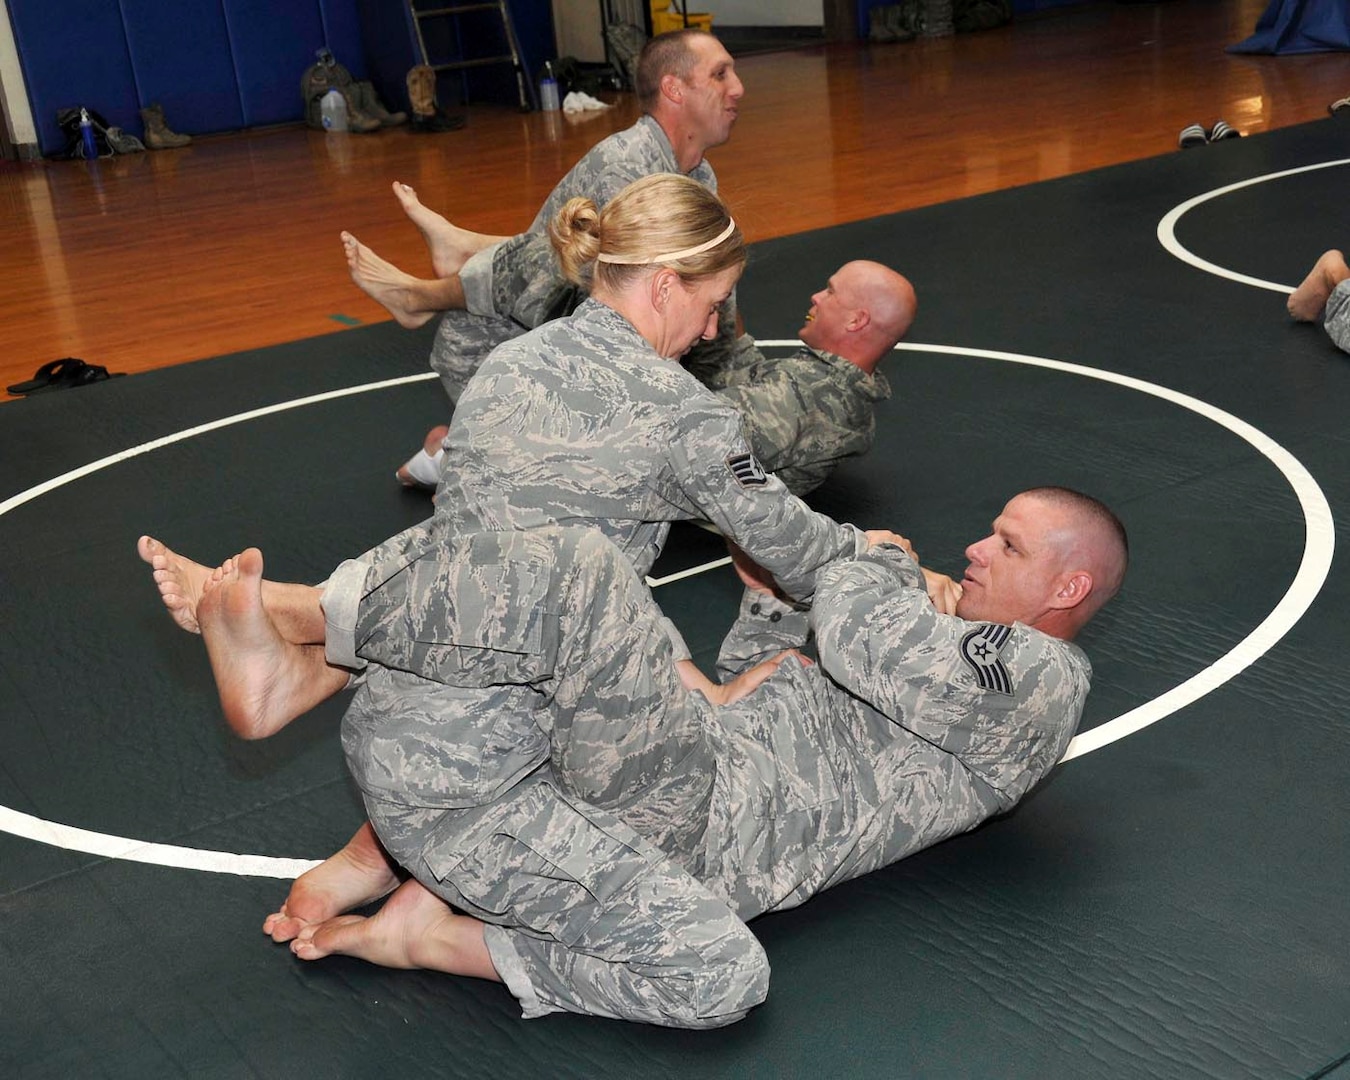 Staff Sgt. Elbert Fish, military training instructor with the 321st Training Squadron, fights off Staff Sgt. Jesse Armstrong's attempt at a cross collar choke during combatives training June 12 at the Warhawk Fitness Center. Armstrong is a security forces technical training instructor with the 343rd TRS. (U.S. Air Force photo/Alan Boedeker)